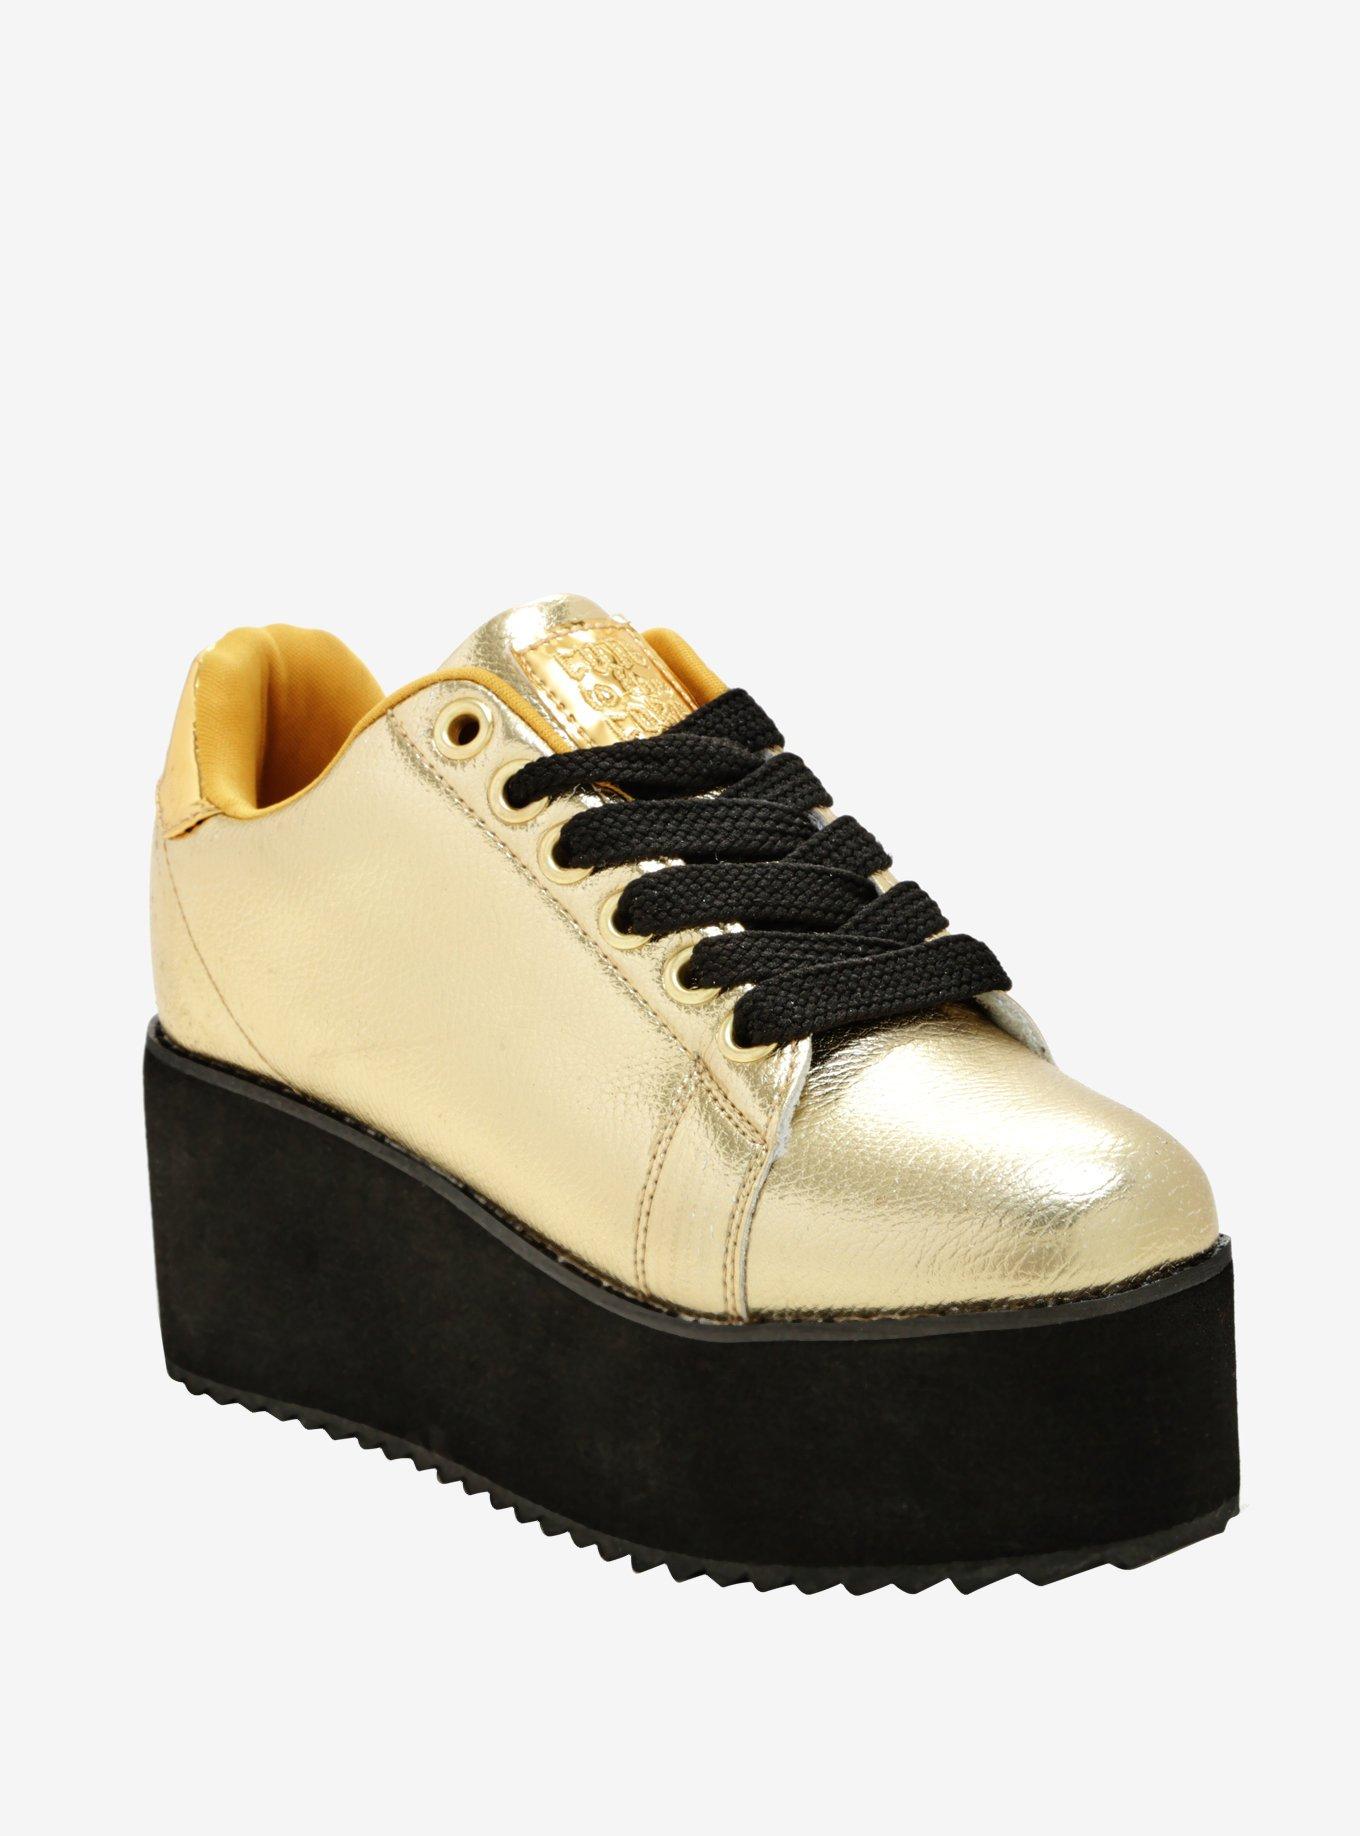 Cute To The Core By YRU LaLa Gold Sneakers Hot Topic Exclusive, MULTI, hi-res